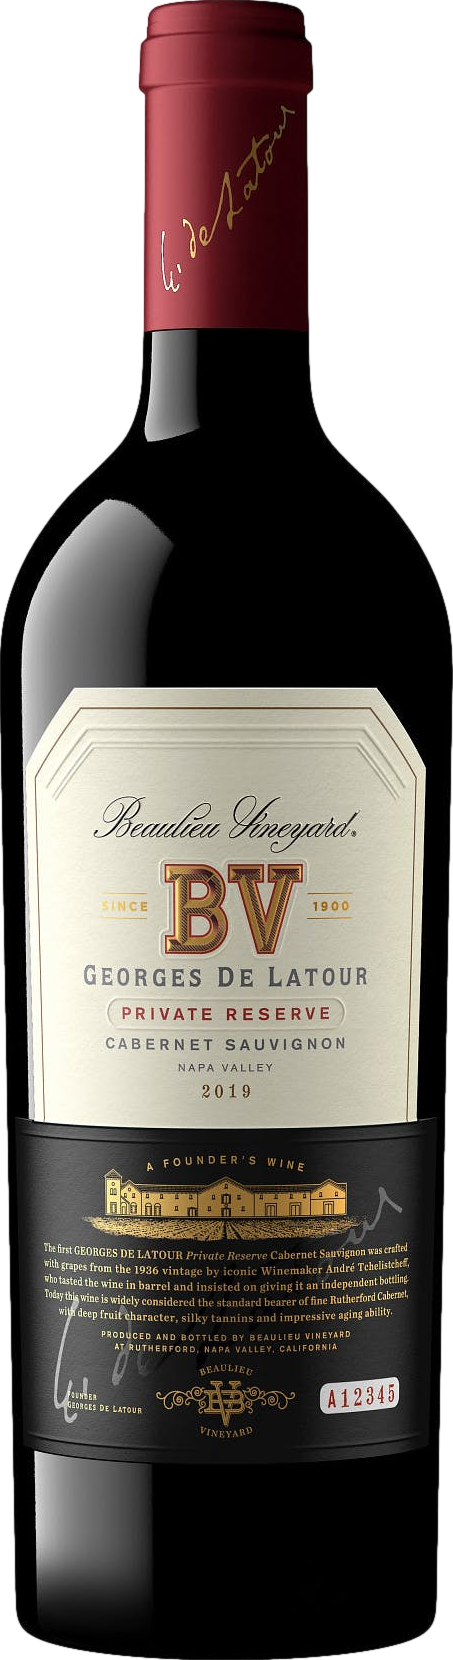 Product image of Beaulieu Vineyard Georges de Latour Privat Reserve 2019 from 8wines